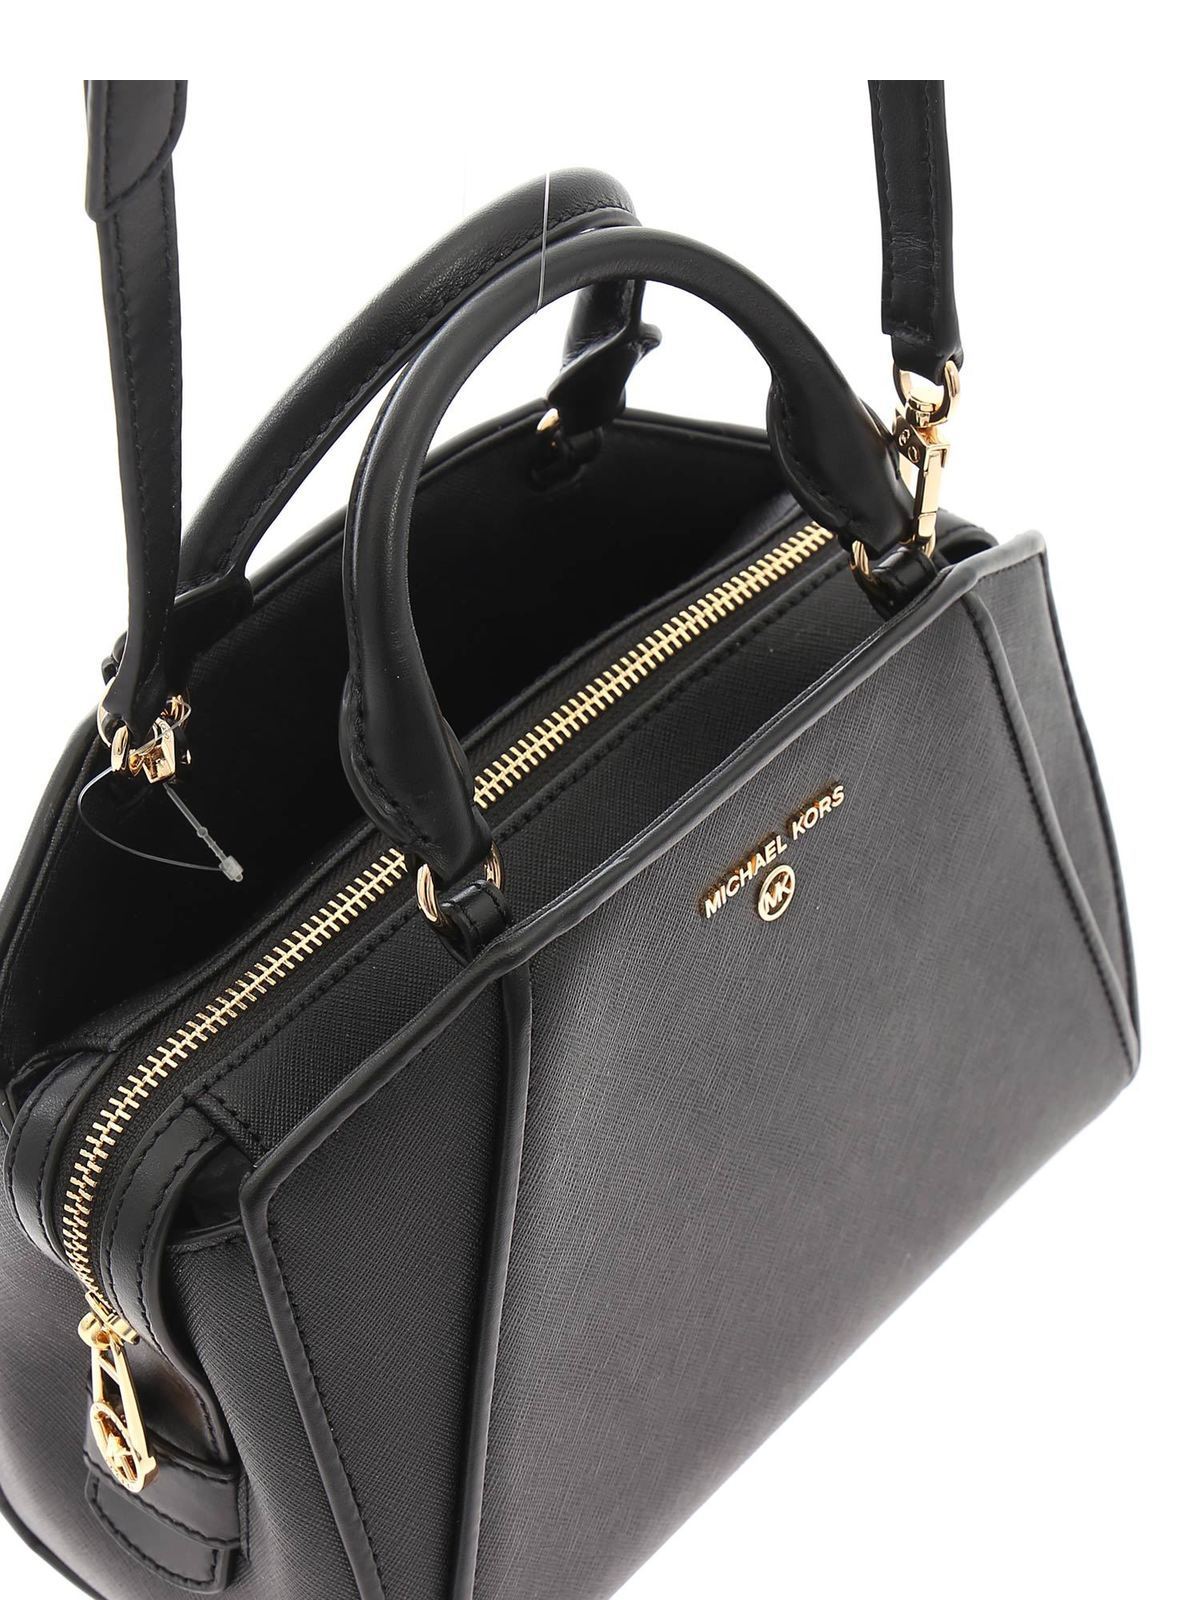 MICHAEL KORS Marilyn Michael bag in Saffiano leather  Black  Michael  Kors tote bags 30S2G6AS2L online on GIGLIOCOM